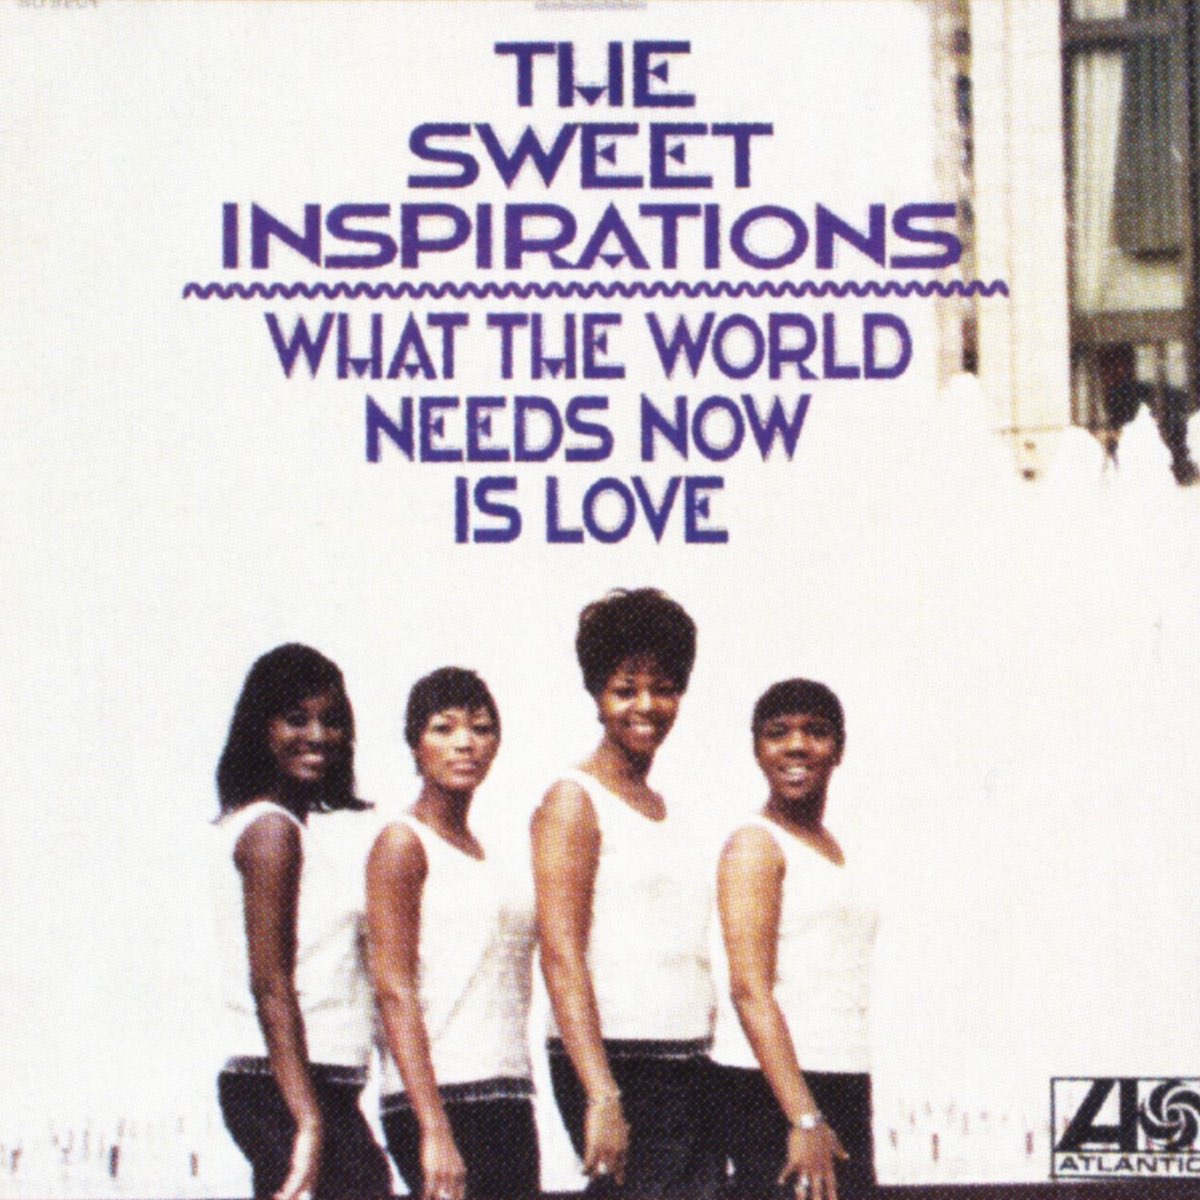 Needs now is love. What the World needs Now is Love. Sweet. The World needs Love. The Sweet inspirations.